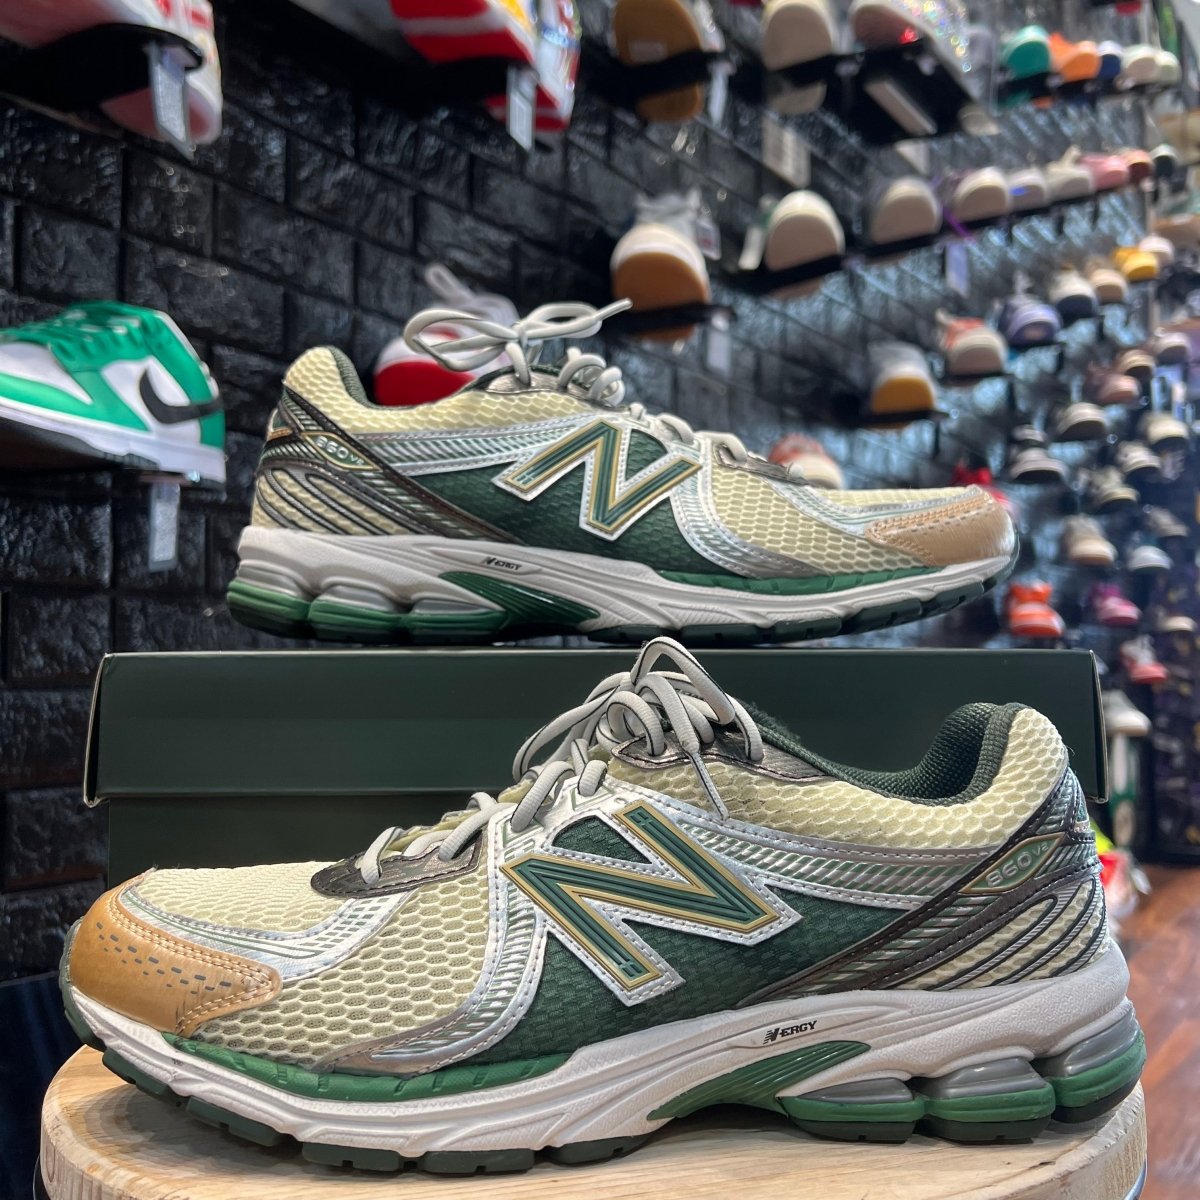 Aimé Leon Dore x 860v2 'Green' - Gently Enjoyed (Used) Men 11.5 - Low Sneaker - New Balance - Jawns on Fire - sneakers